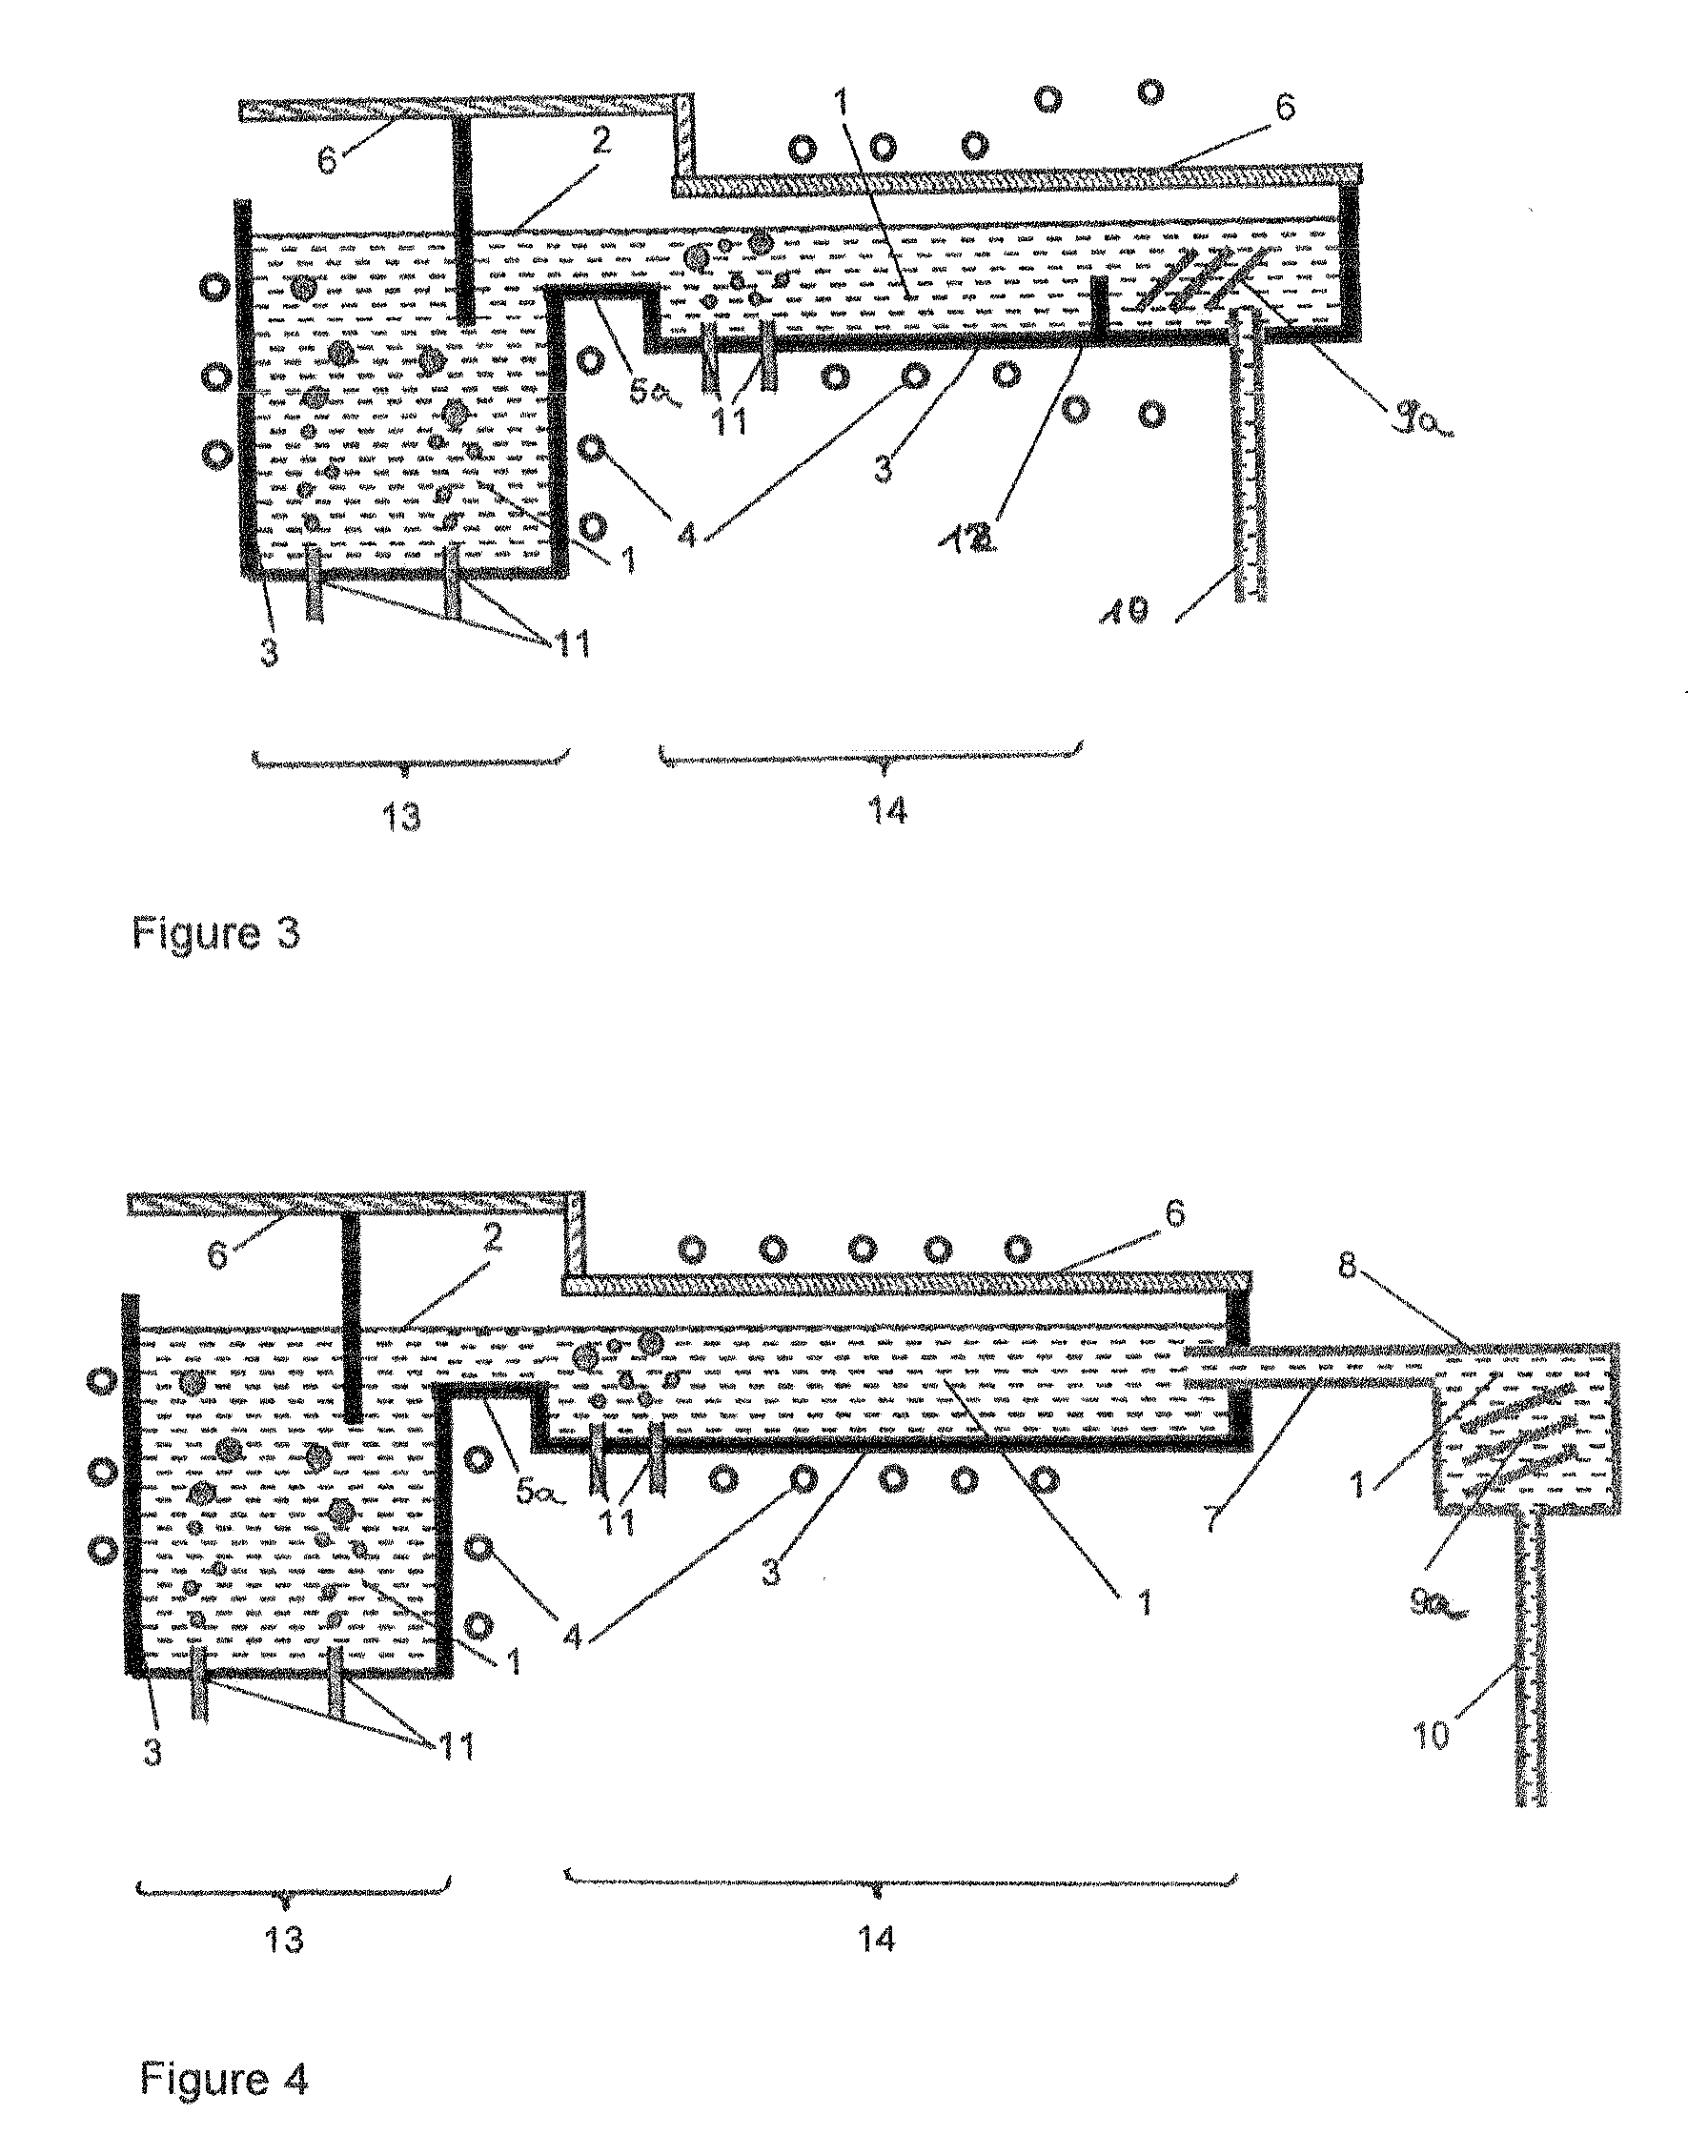 Method and system for producing glass, in which chemical reduction of glass components is avoided